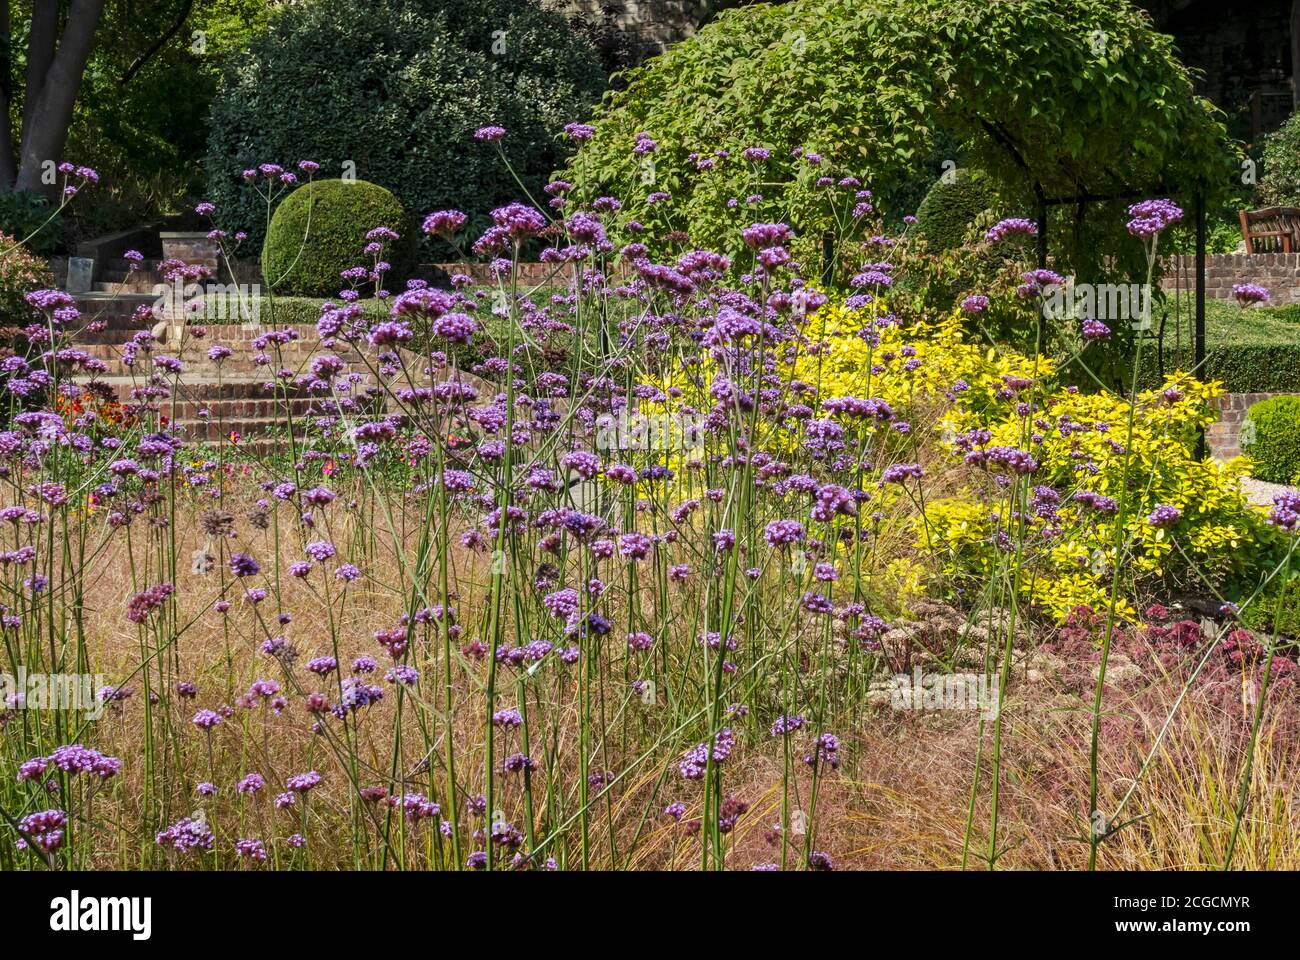 Verbena bonariensis flowering purple flowers in a herbaceous border in a cottage garden summer England UK United Kingdom GB Great Britain Stock Photo